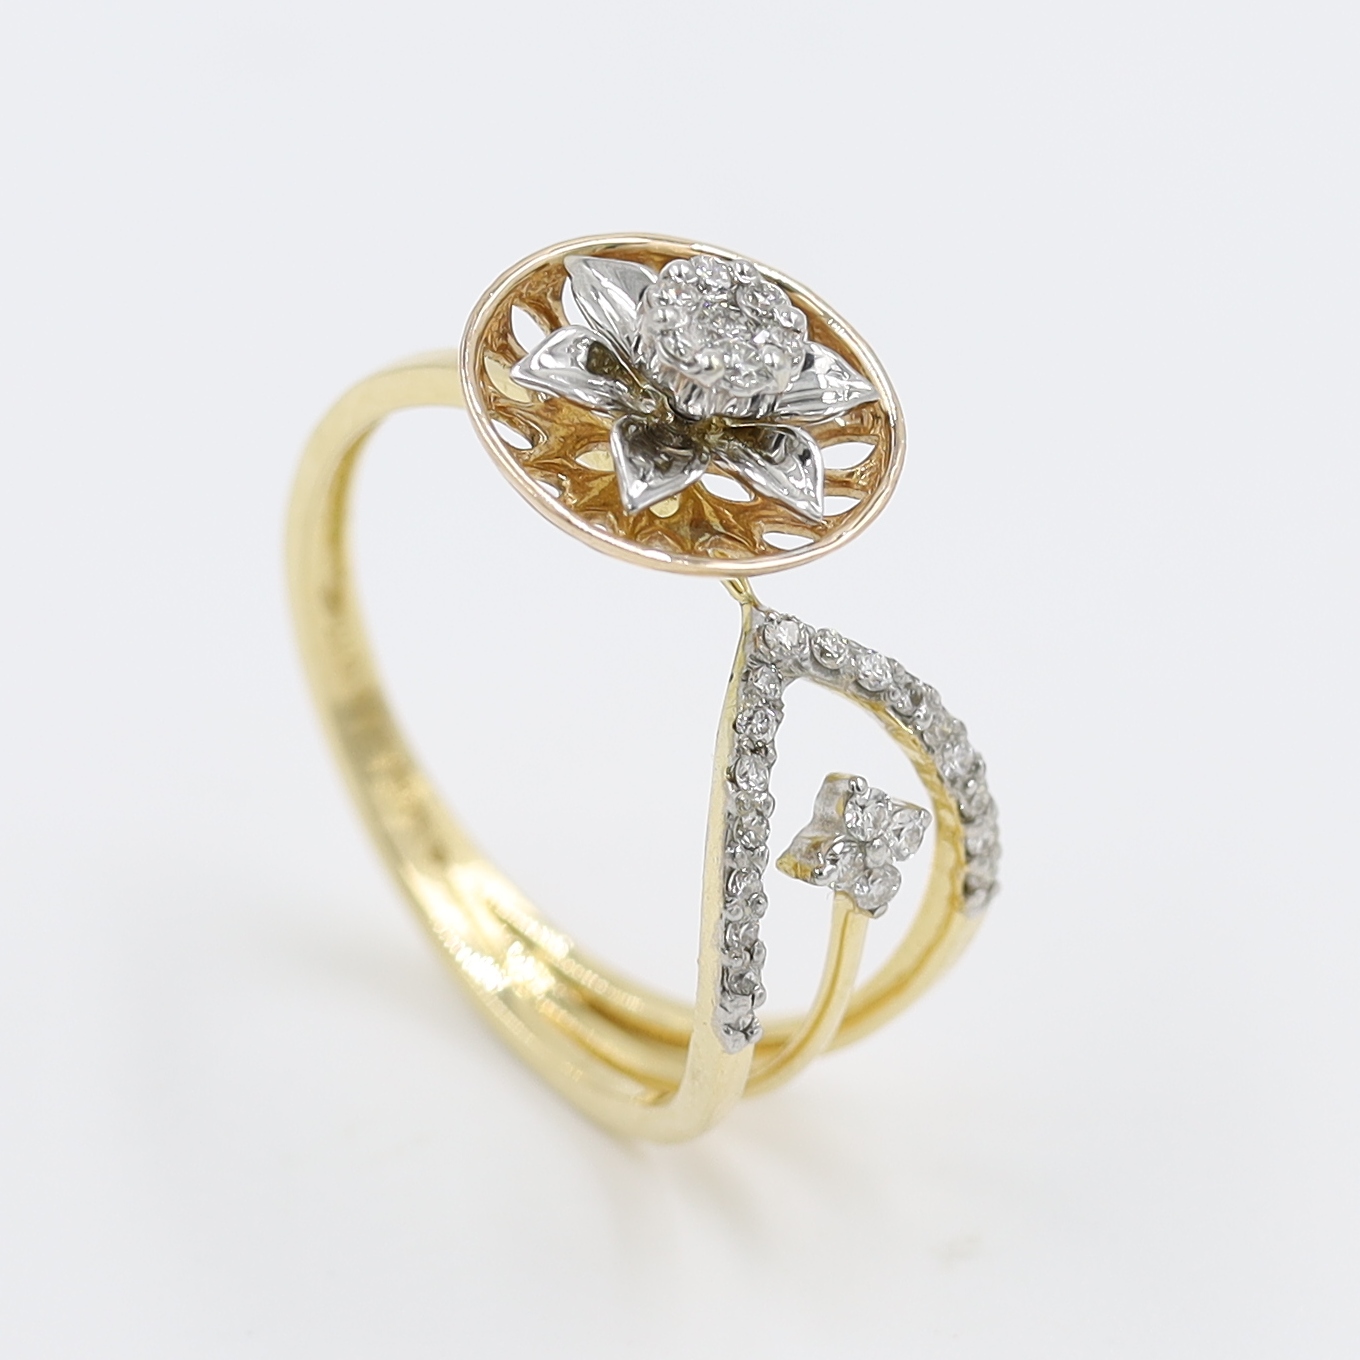 Stunning Floral Gold And Diamond Finger Ring